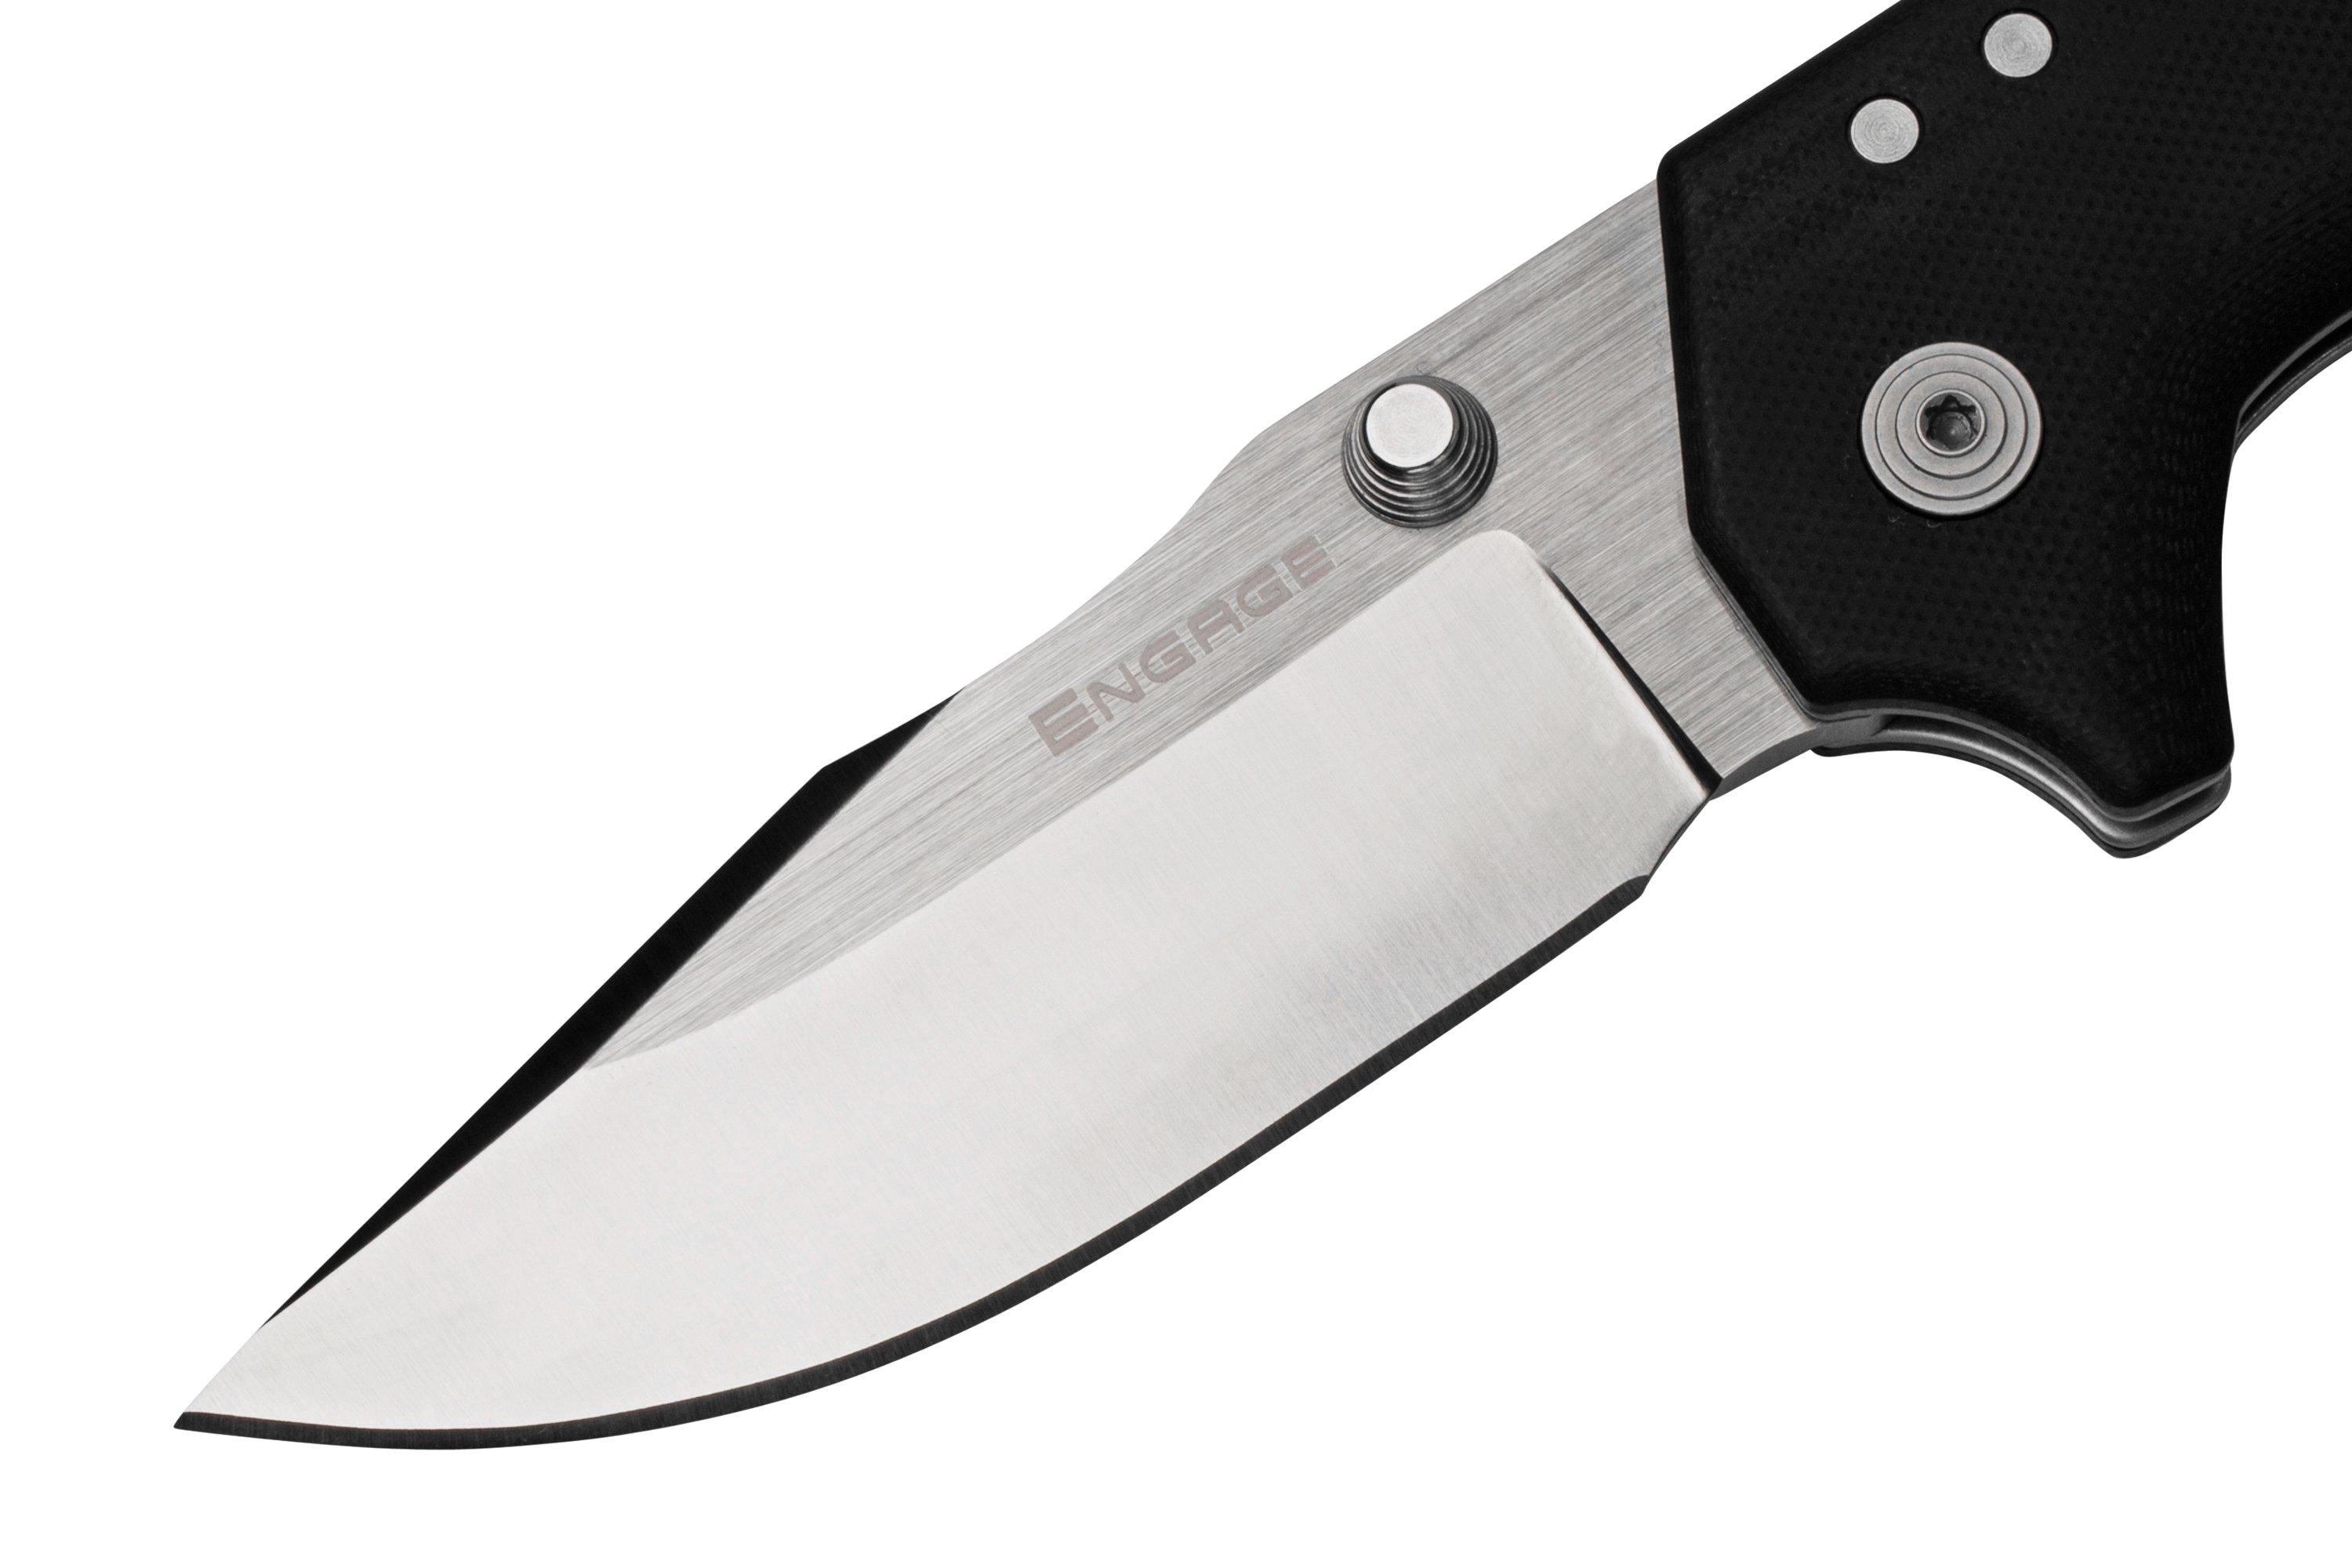 COLD STEEL ENGAGE 3.5 S35VN FOLDING KNIFE